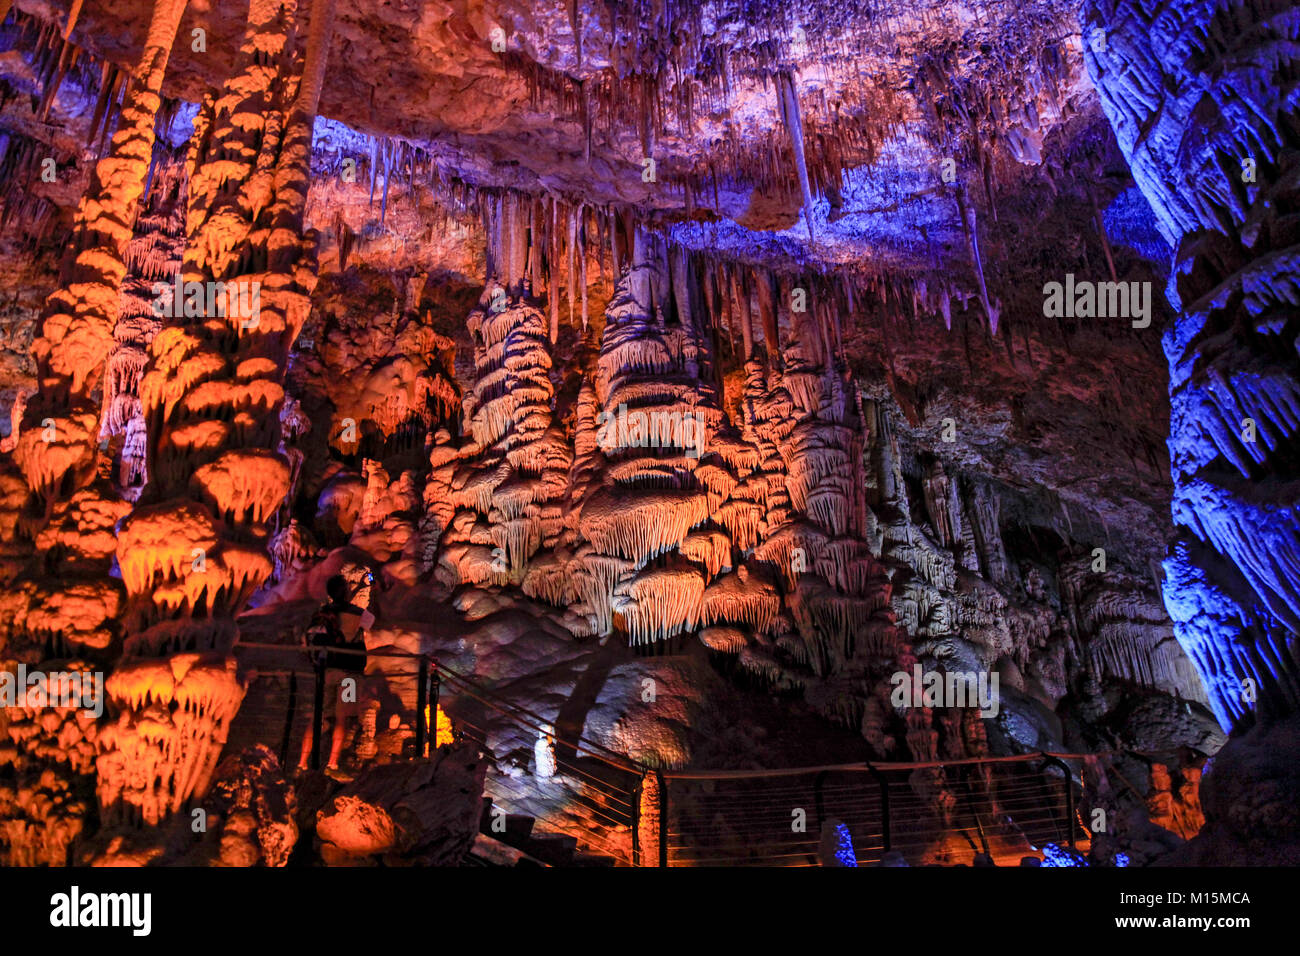 The Avshalom Stalactite Cave Nature Reserve (also called Soreq Cave) 82-meter-long, 60-meter-wide cave is on the western slopes of the Judean Hills ou Stock Photo